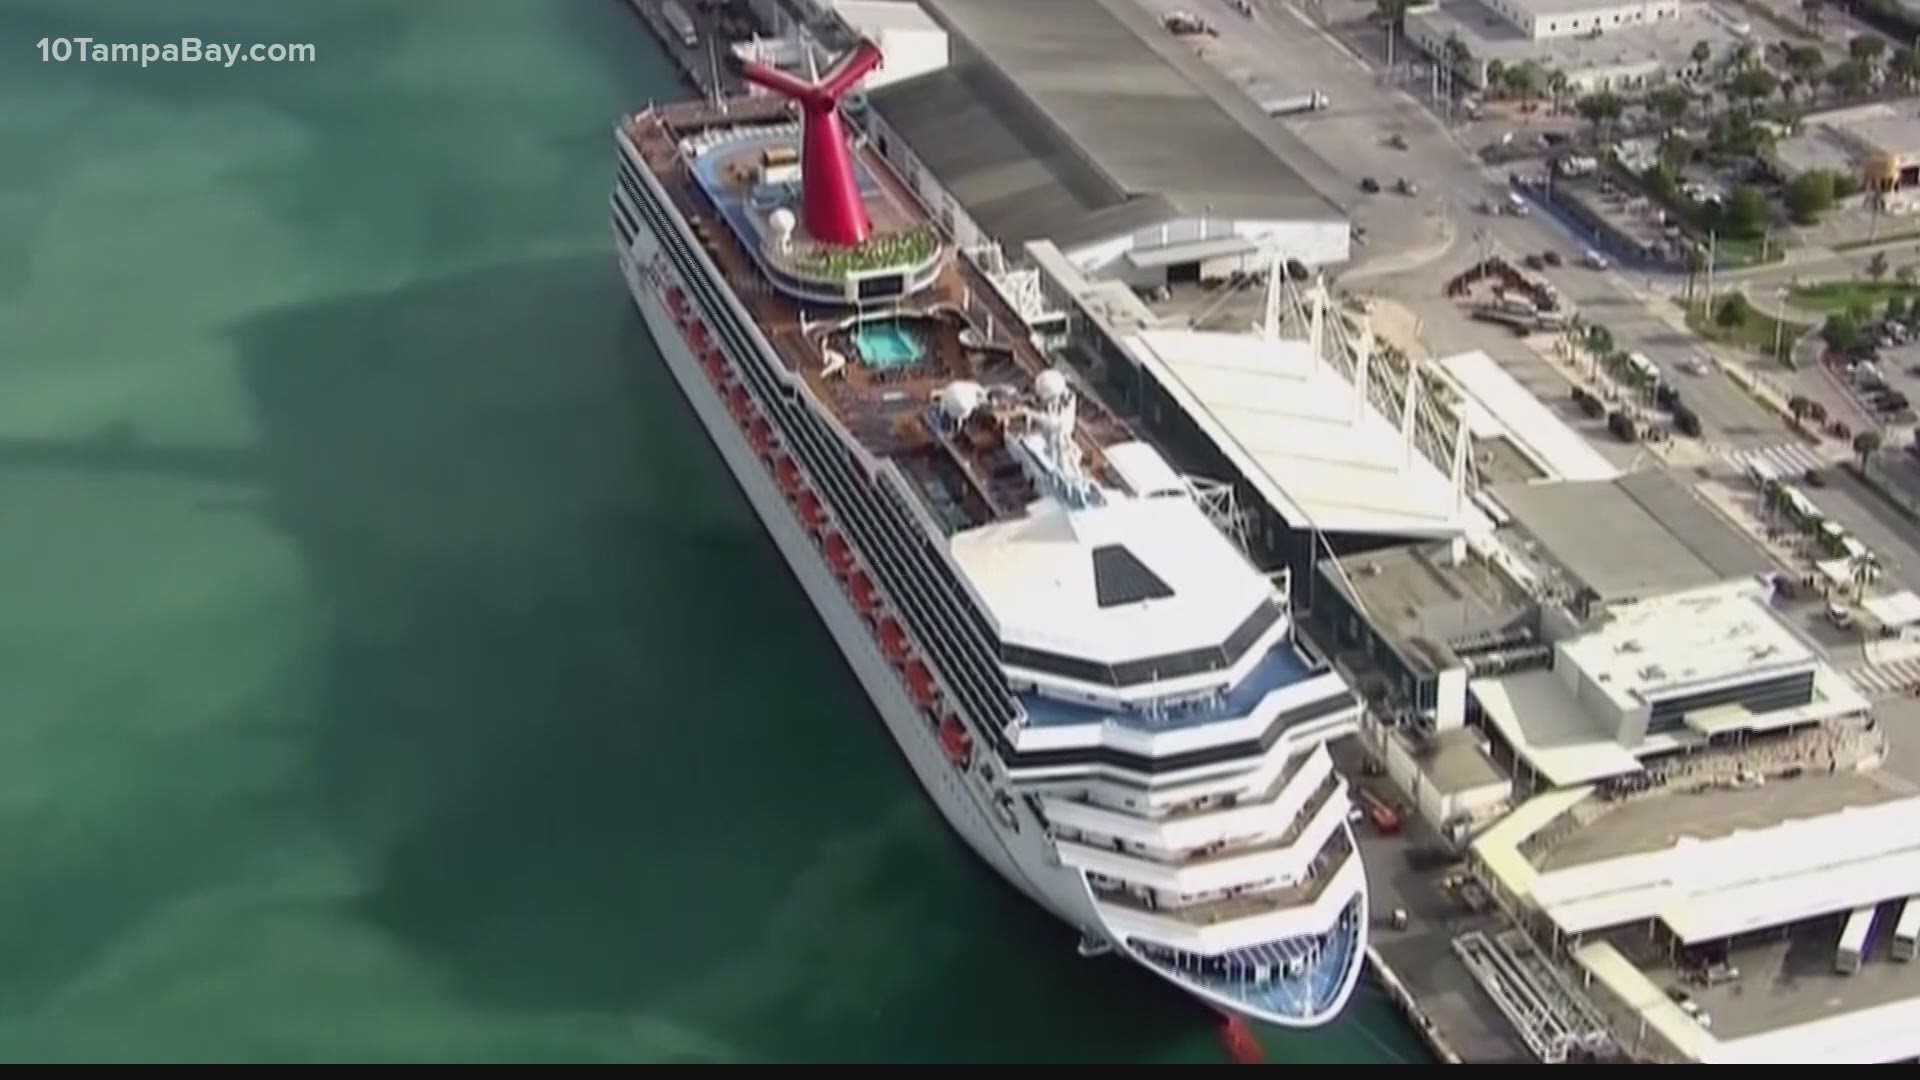 Carnival Cruise Line plans to start sailing again toward the end of the month, and it wants its customers vaccinated. Fellow customers agree, a travel expert said.